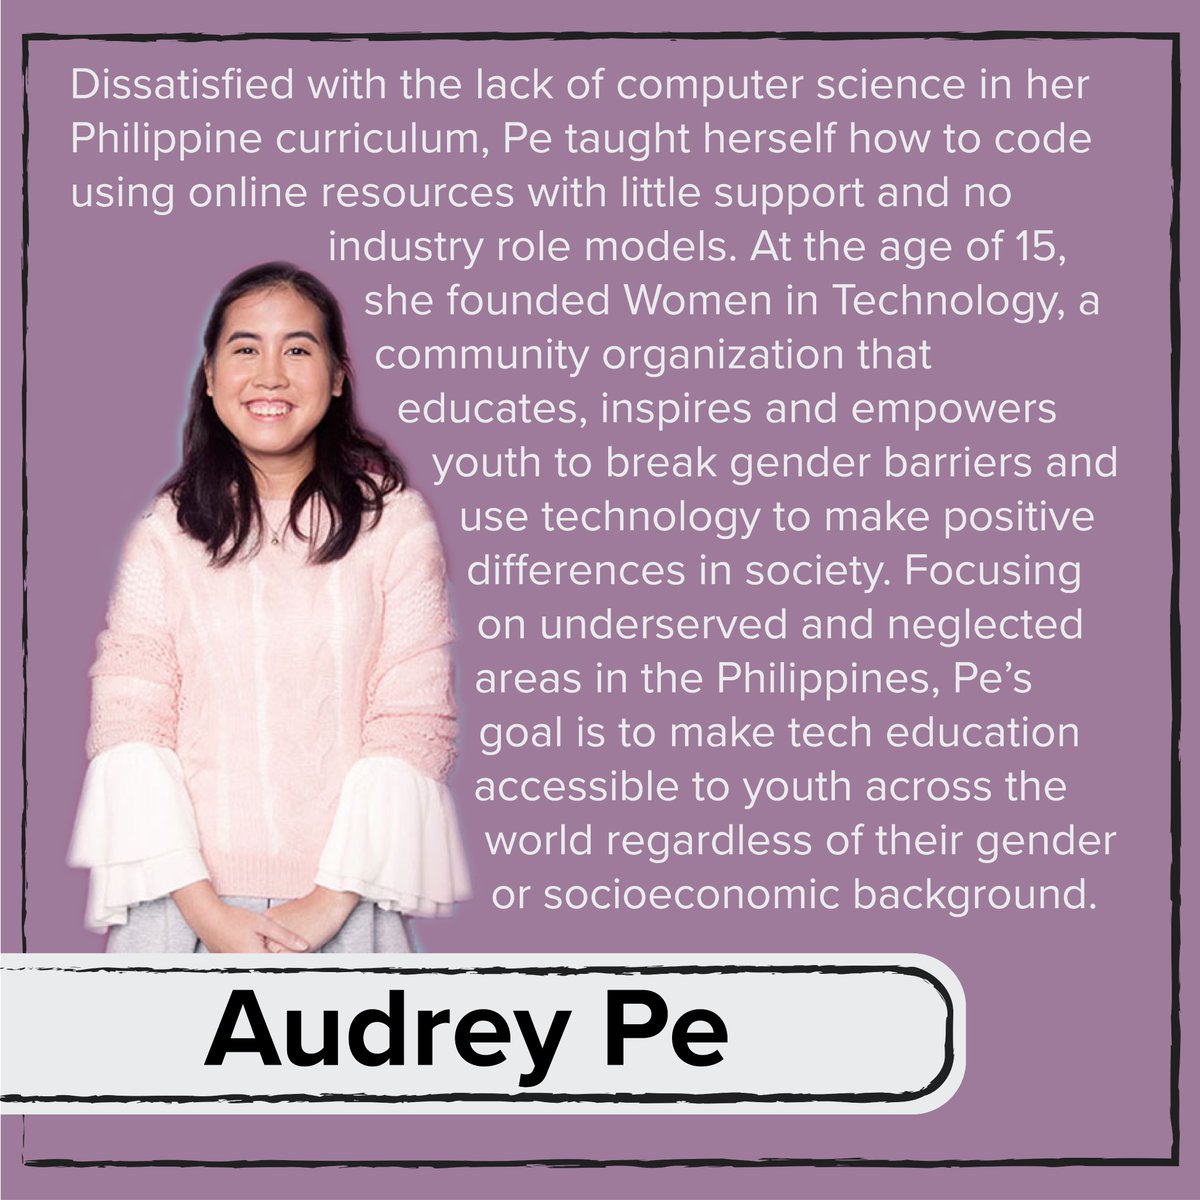  @audreyisabelpe has already done more in her youth than many people will do in their lifetime. Dissatisfied with the support and role models for women in computer science, she founded  @witechorg, a community organization that educates, inspires and empowers youth in technology.